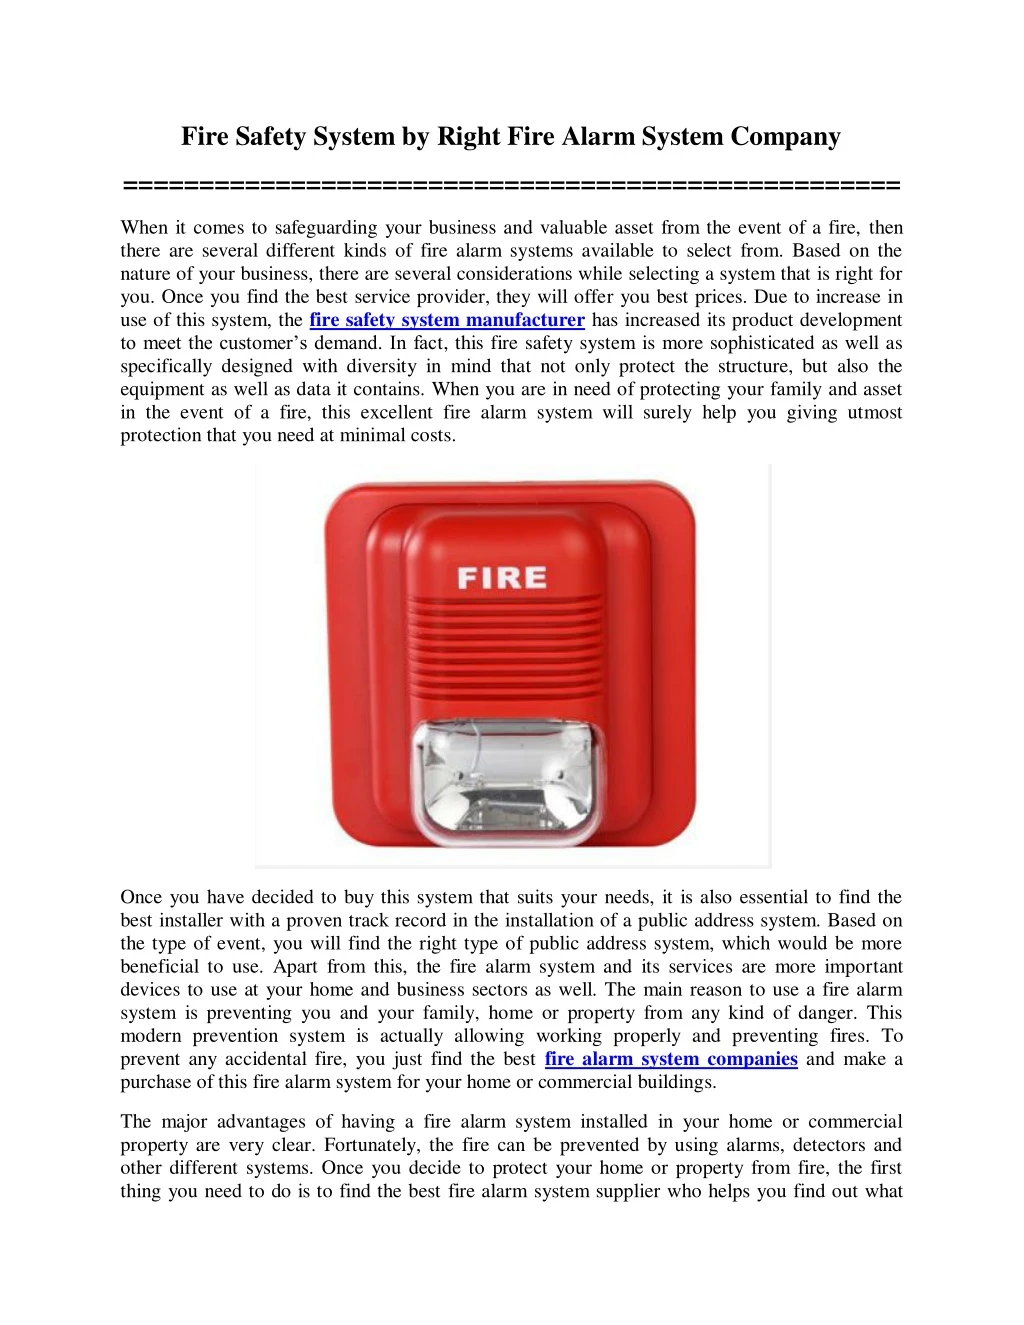 fire safety system by right fire alarm system